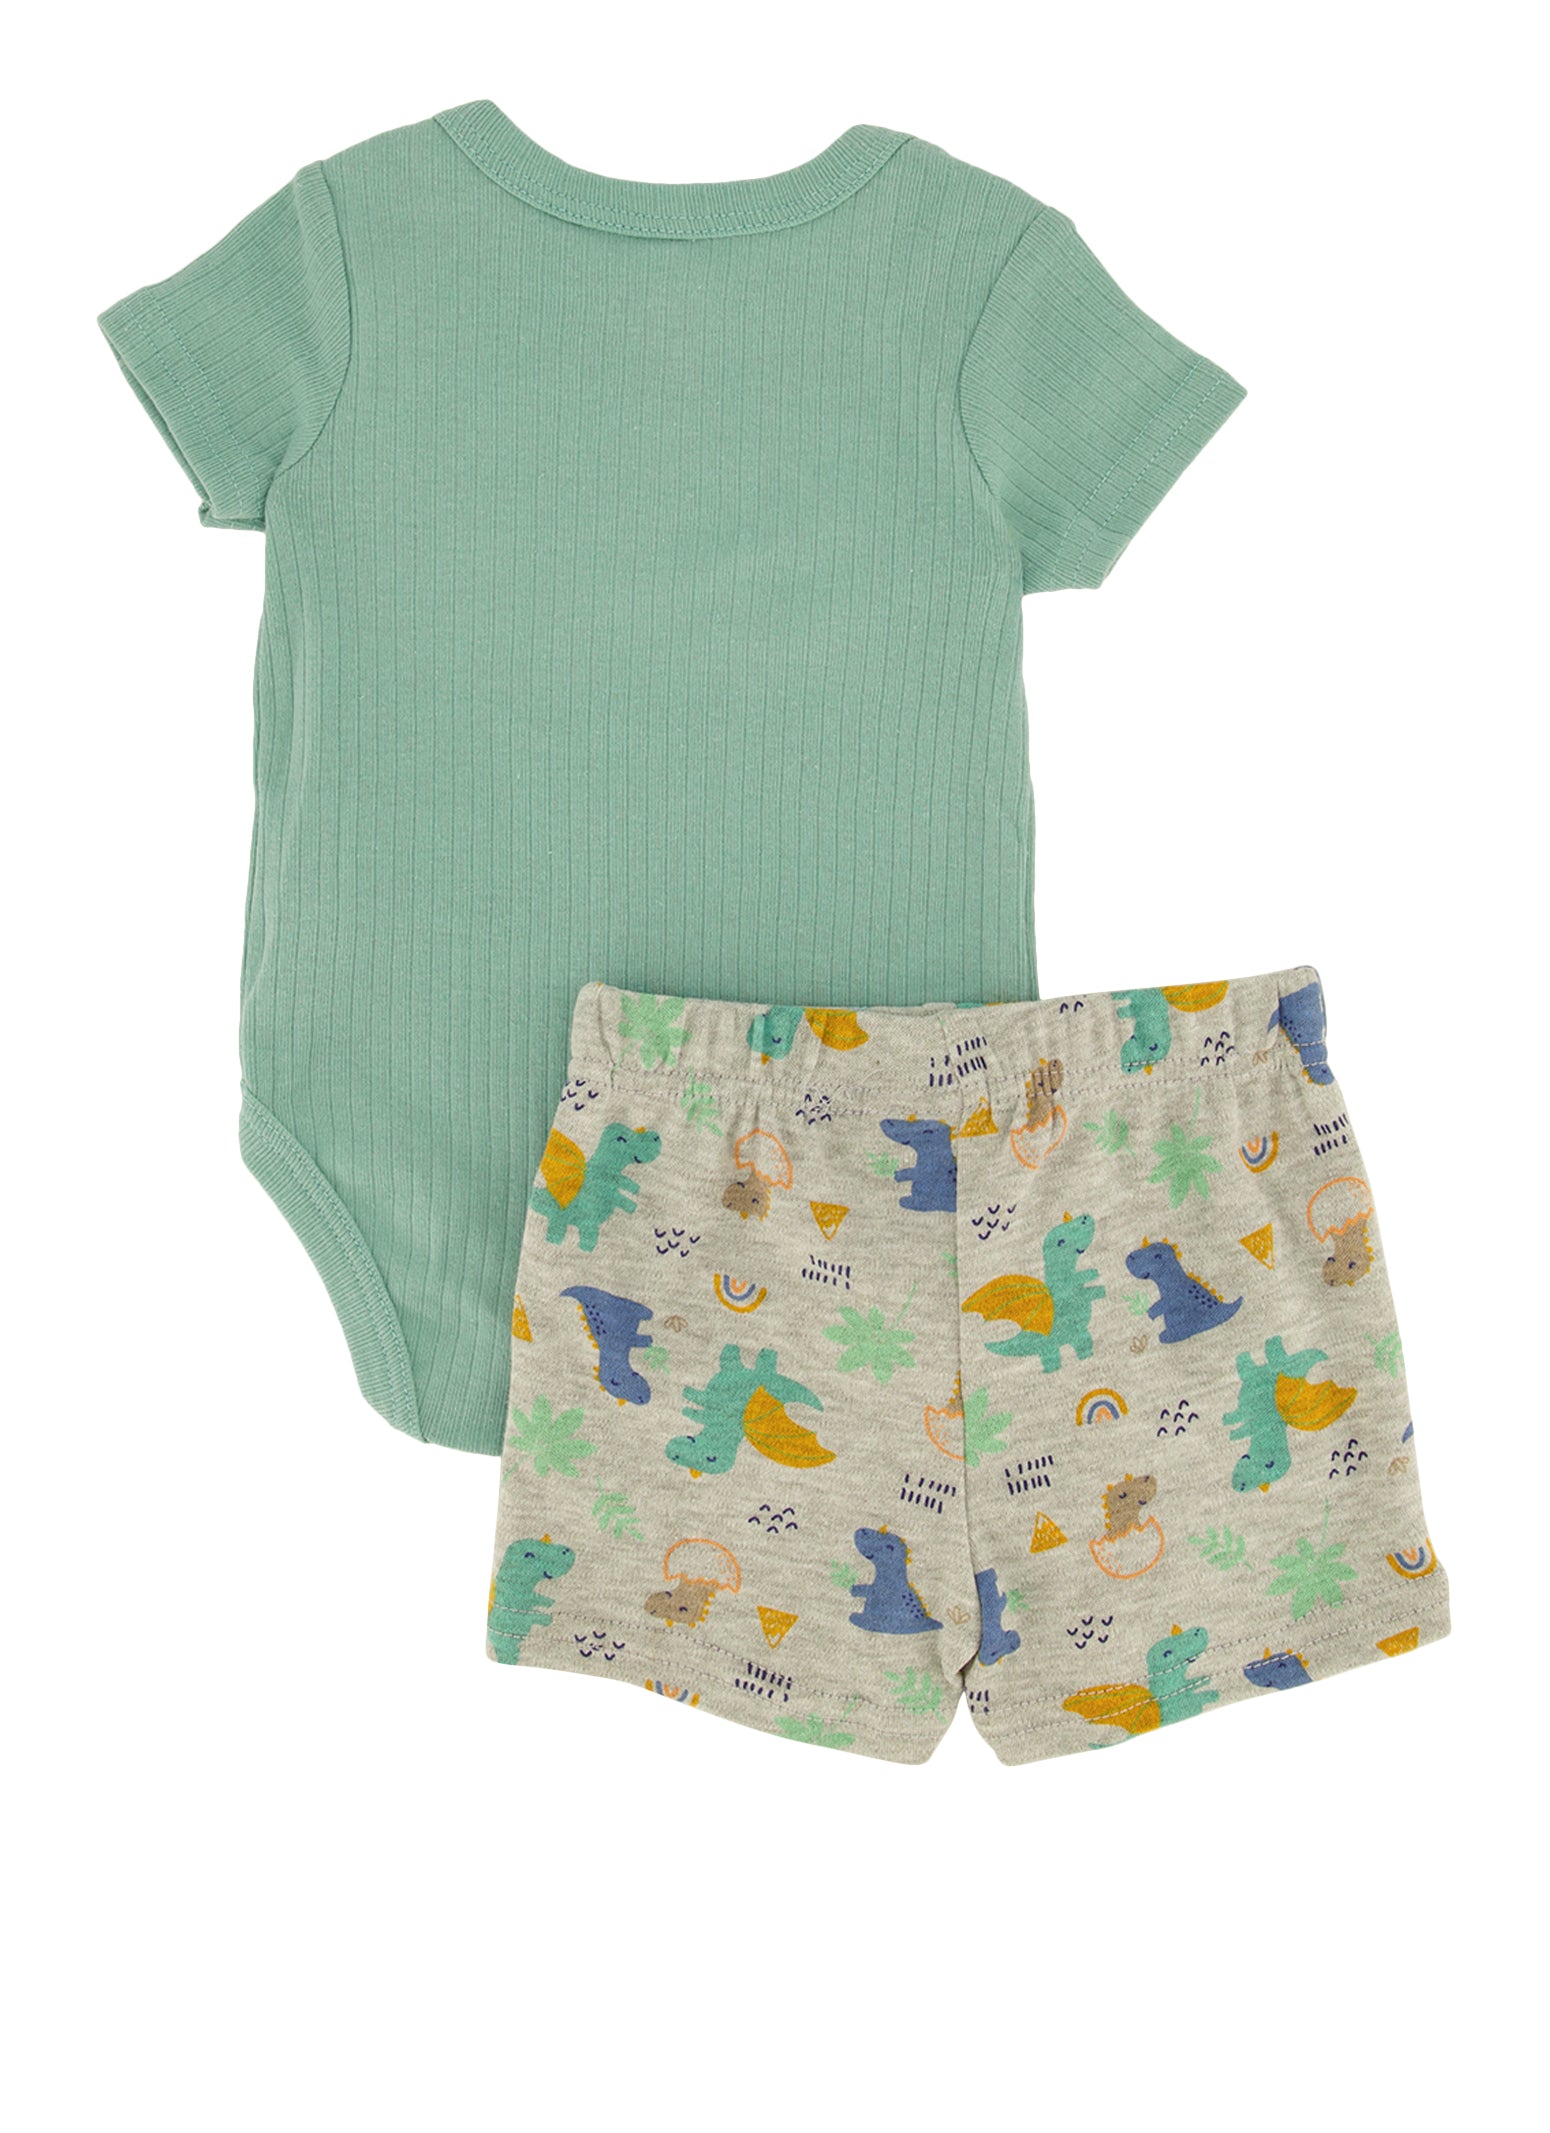 Baby Boys 0-9M Dinosaur Graphic Bodysuit and Shorts with Hat, Green, Size 6-9M